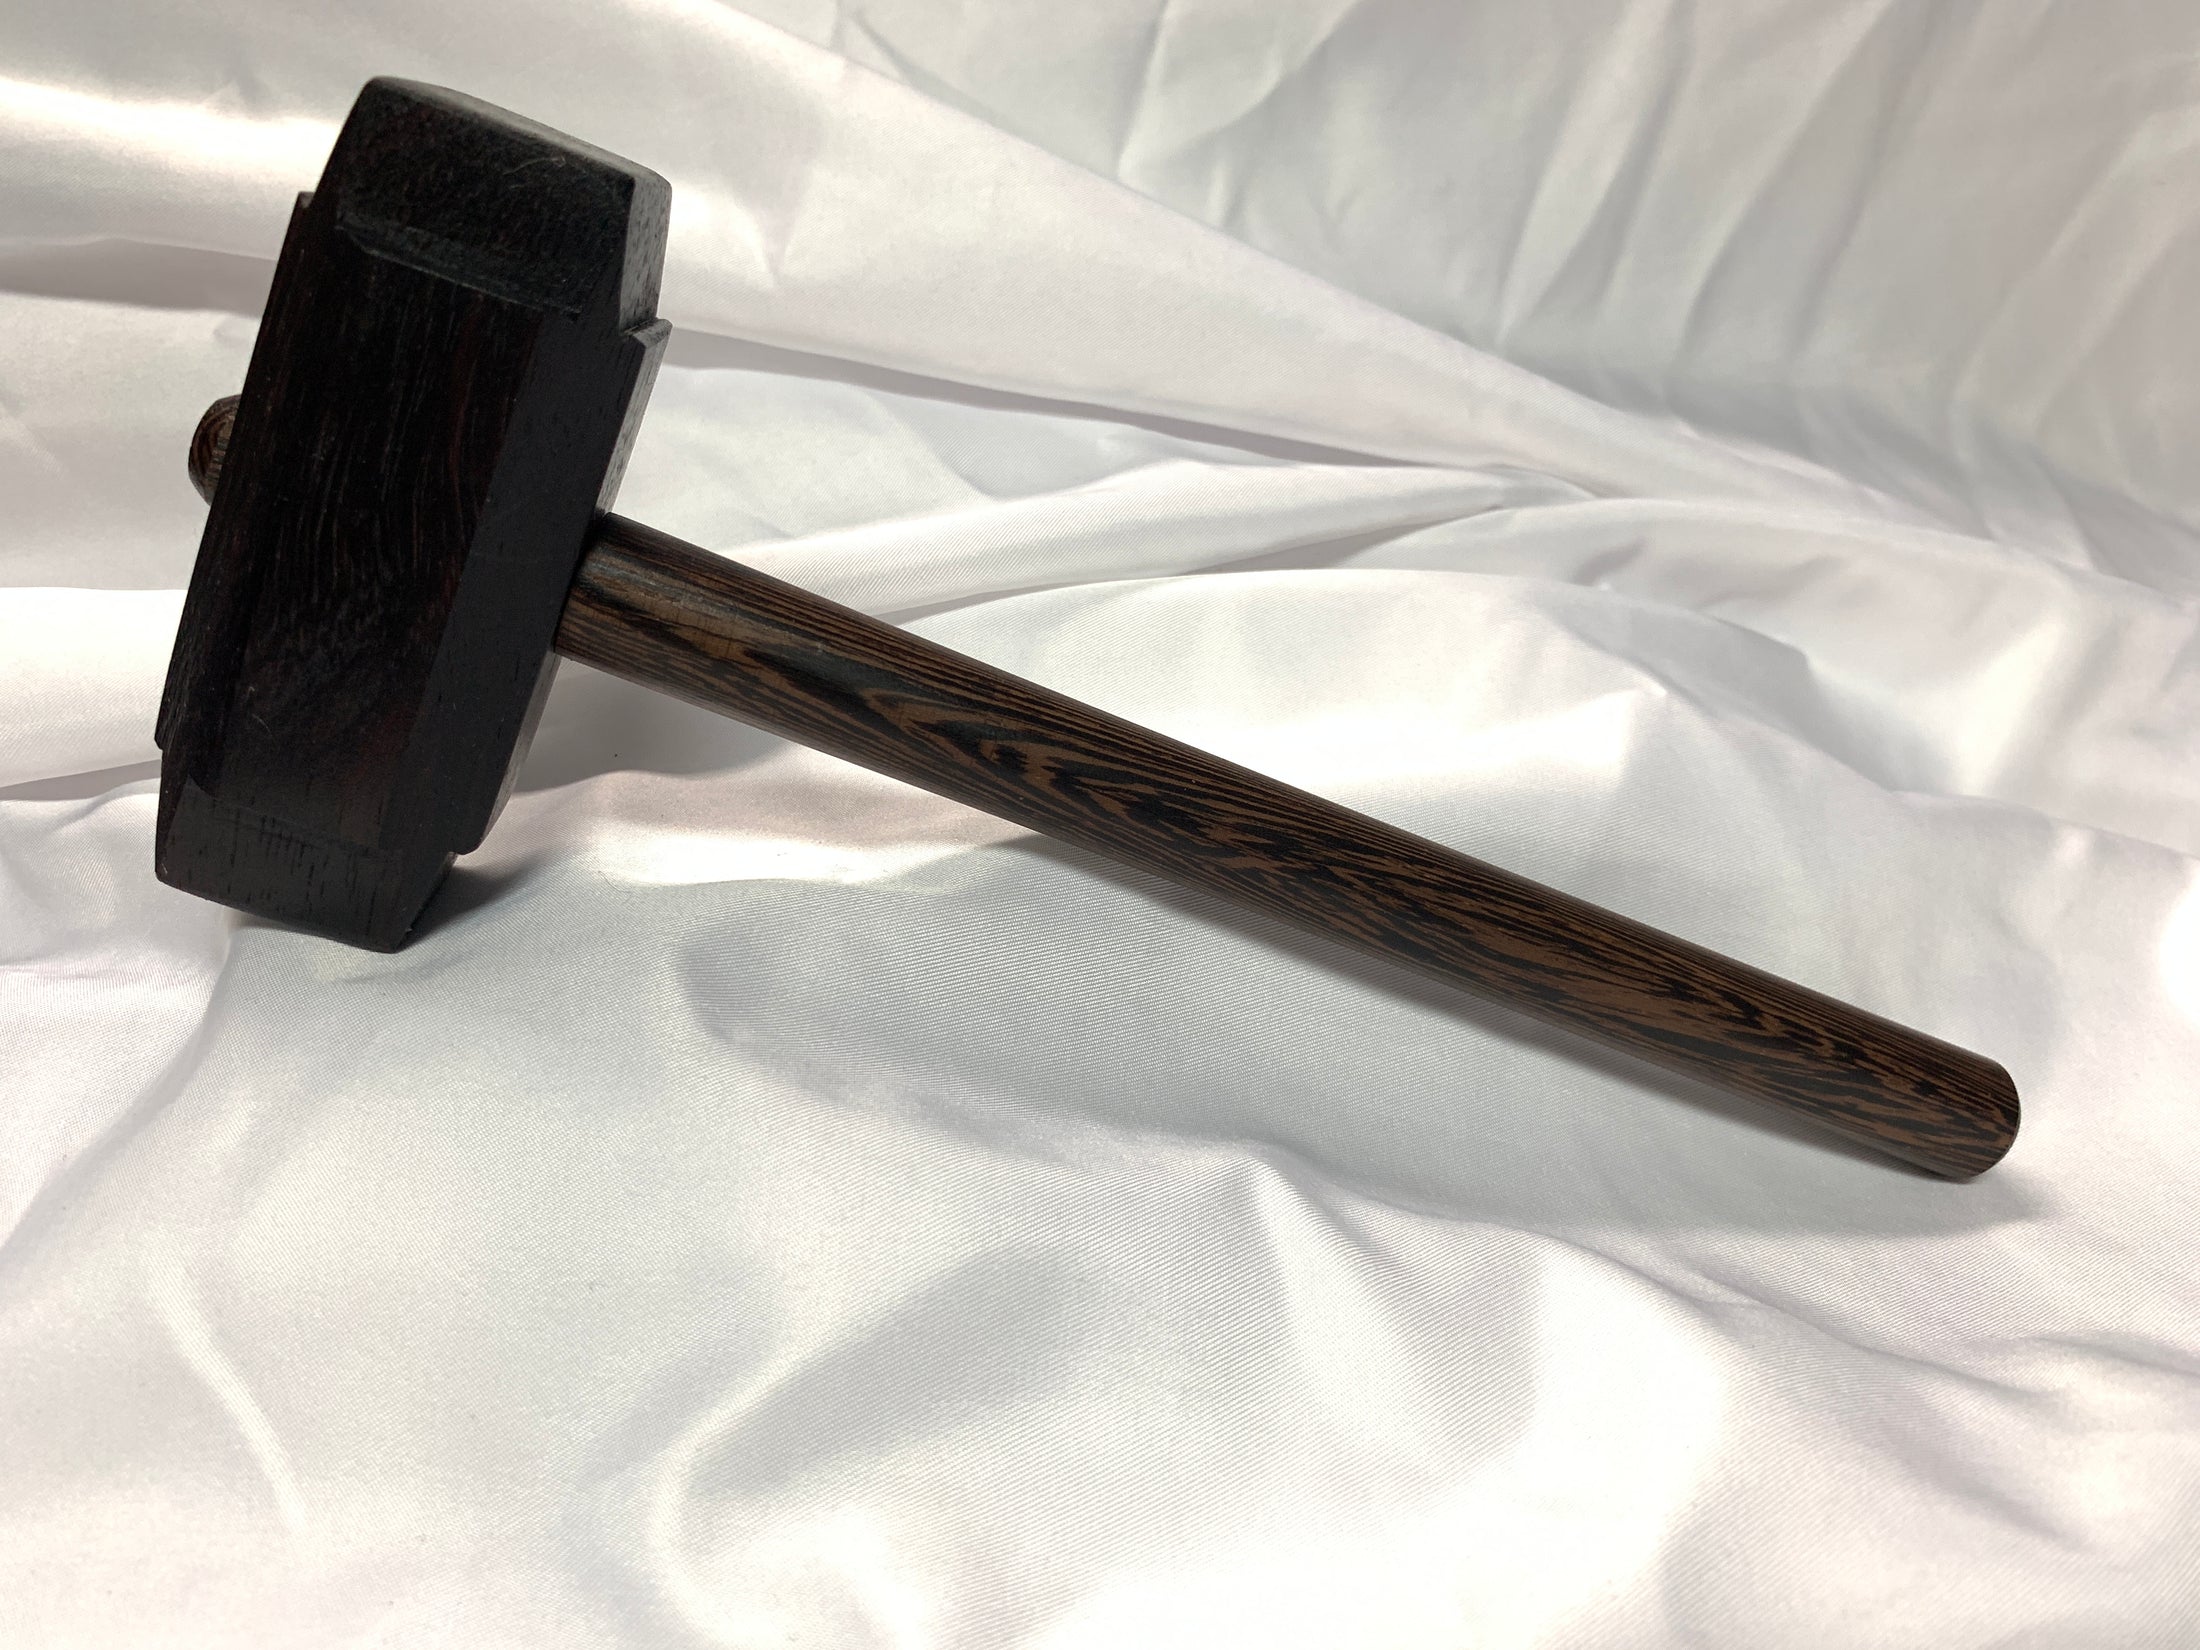 Thors Hammer Woodworking Mallet East Indian Rosewood Head with Wenge Handle Kings Fine Woodworking